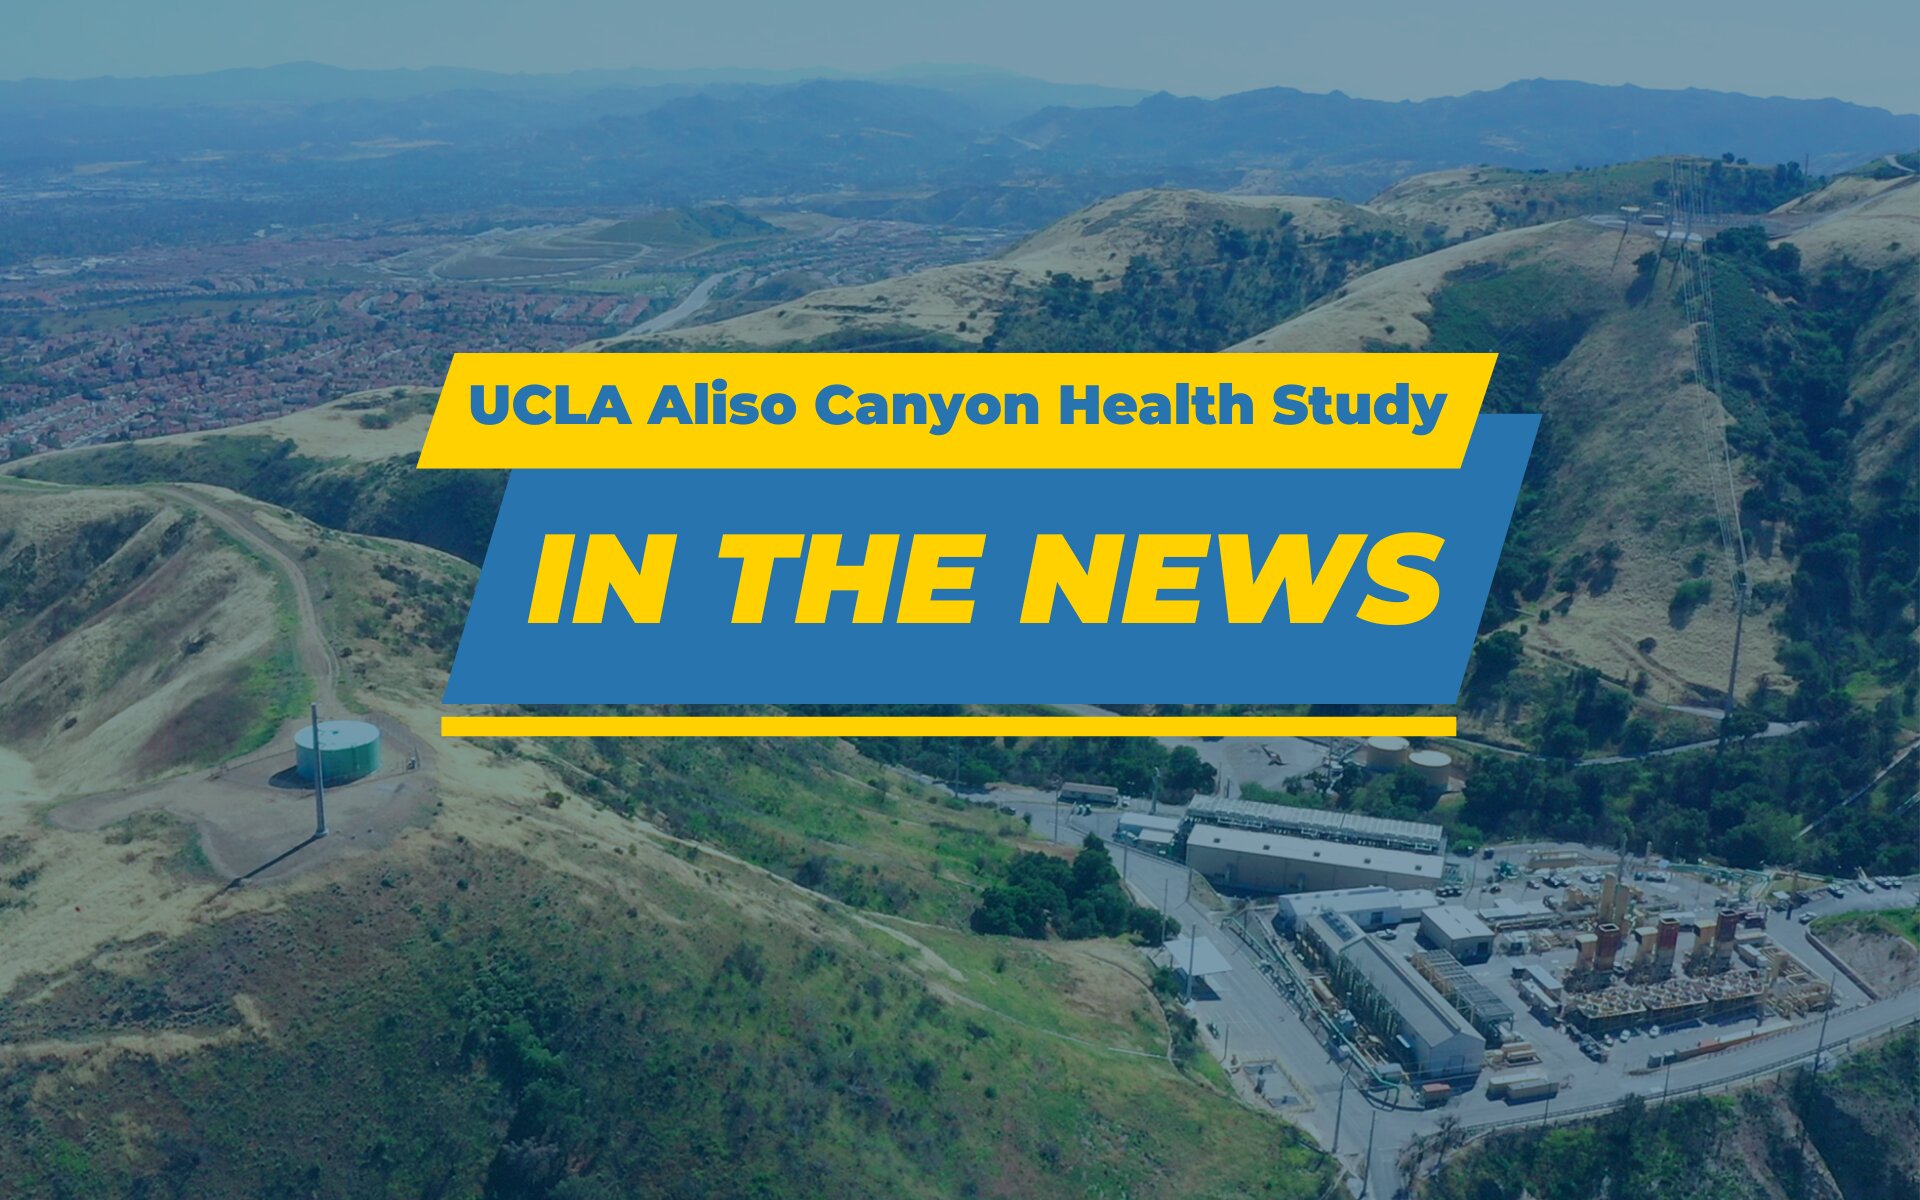 UCLA Aliso Canyon Health Study In the News